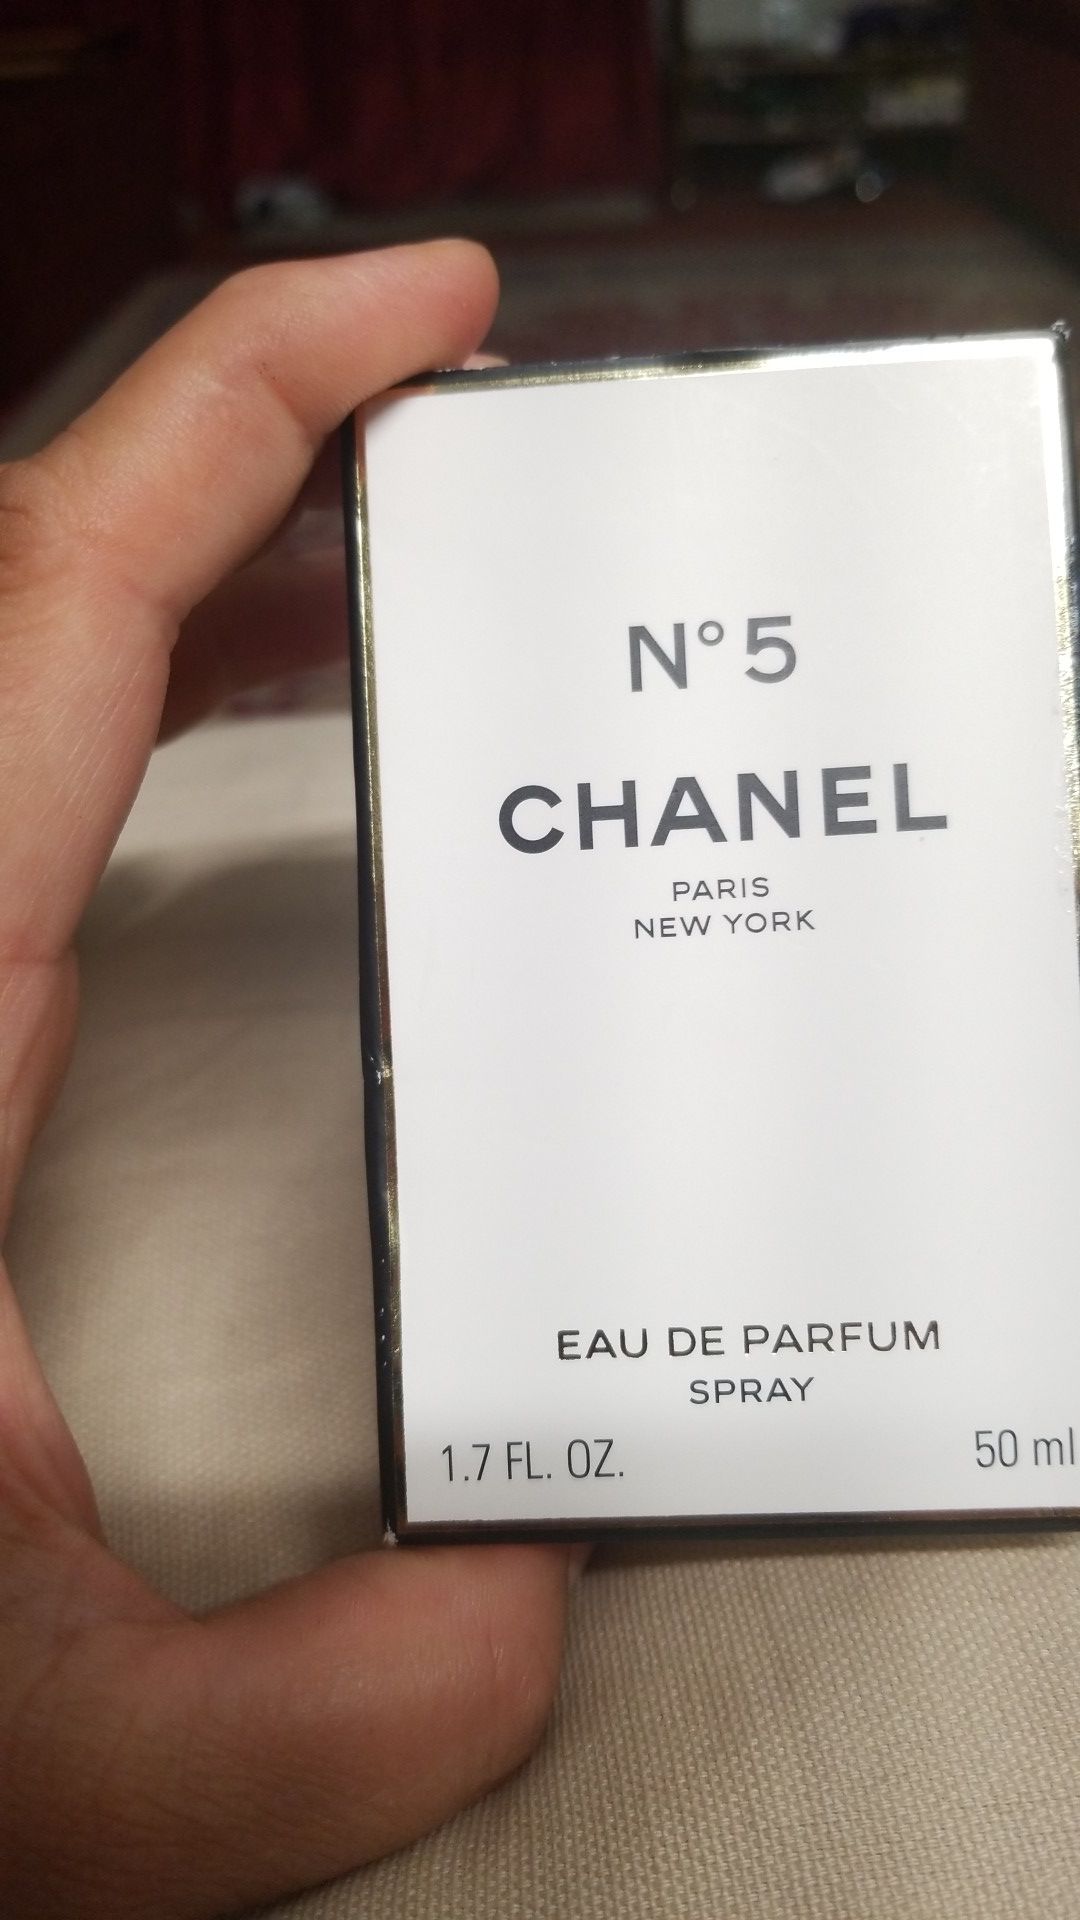 N 5 CHANEL PERFUME FOR MOTHER'S DAY GIFT